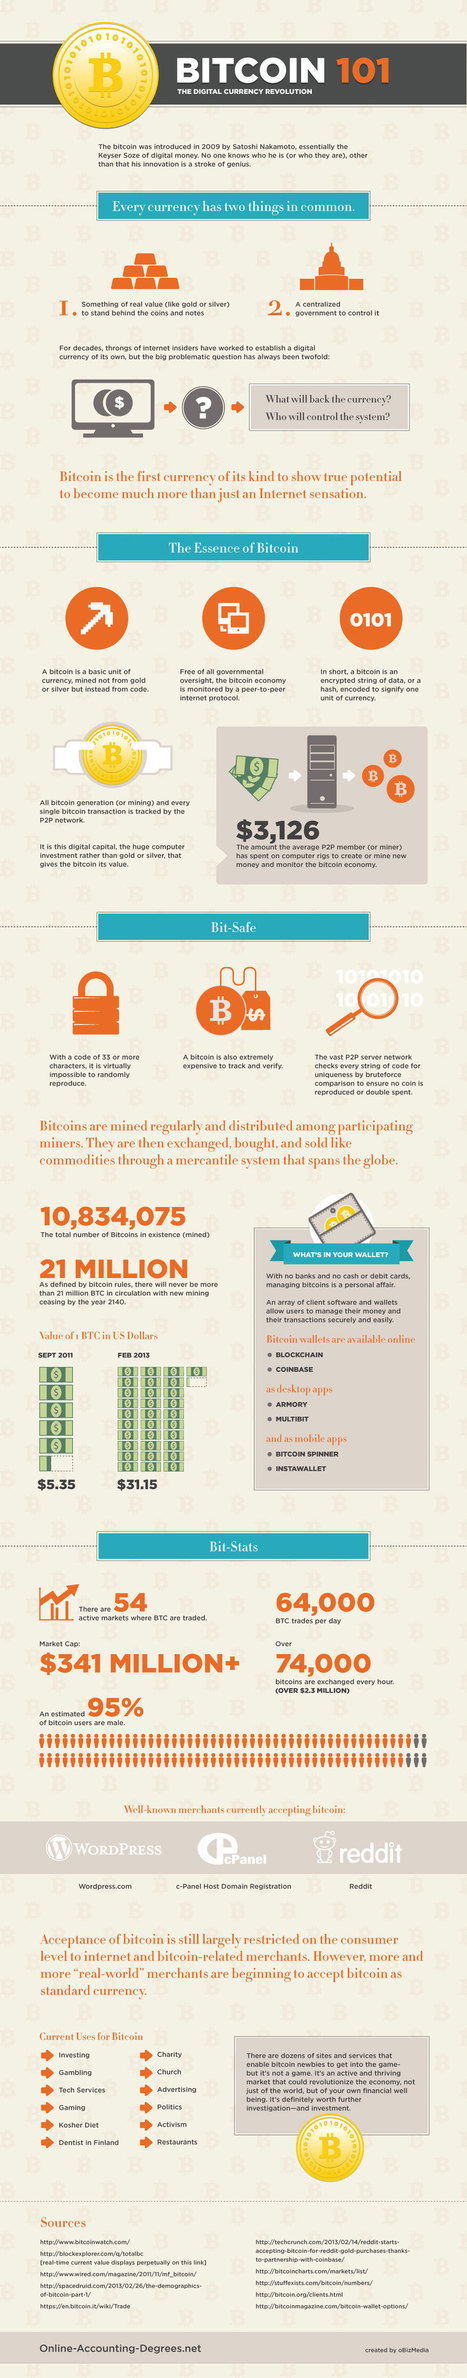 Bitcoin 101: The Digital Currency Revolution [INFOGRAPHIC] | A New Society, a new education! | Scoop.it